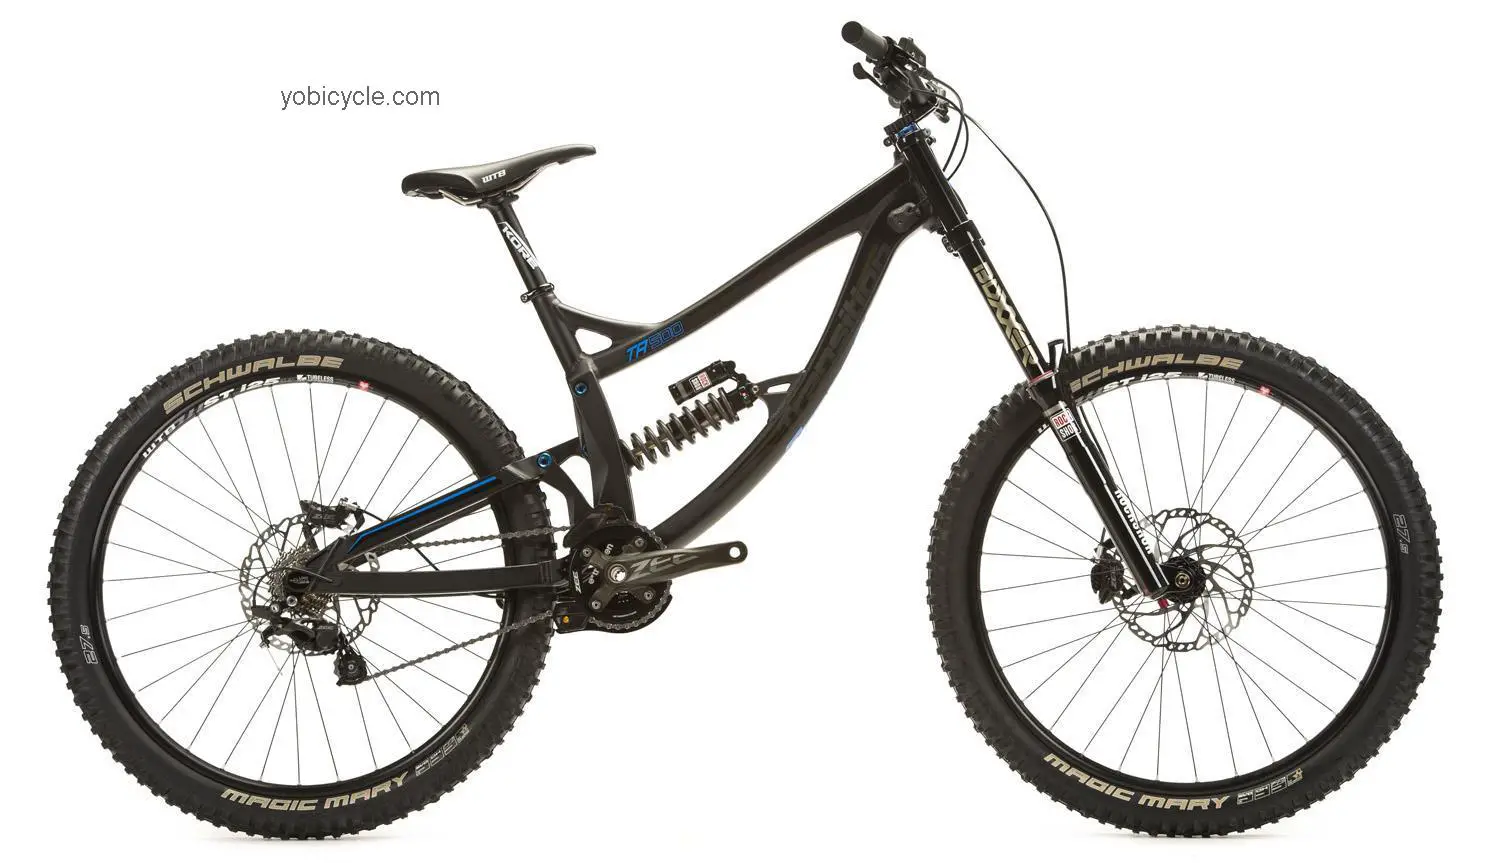 Transition TR 500 2 27.5 2015 comparison online with competitors